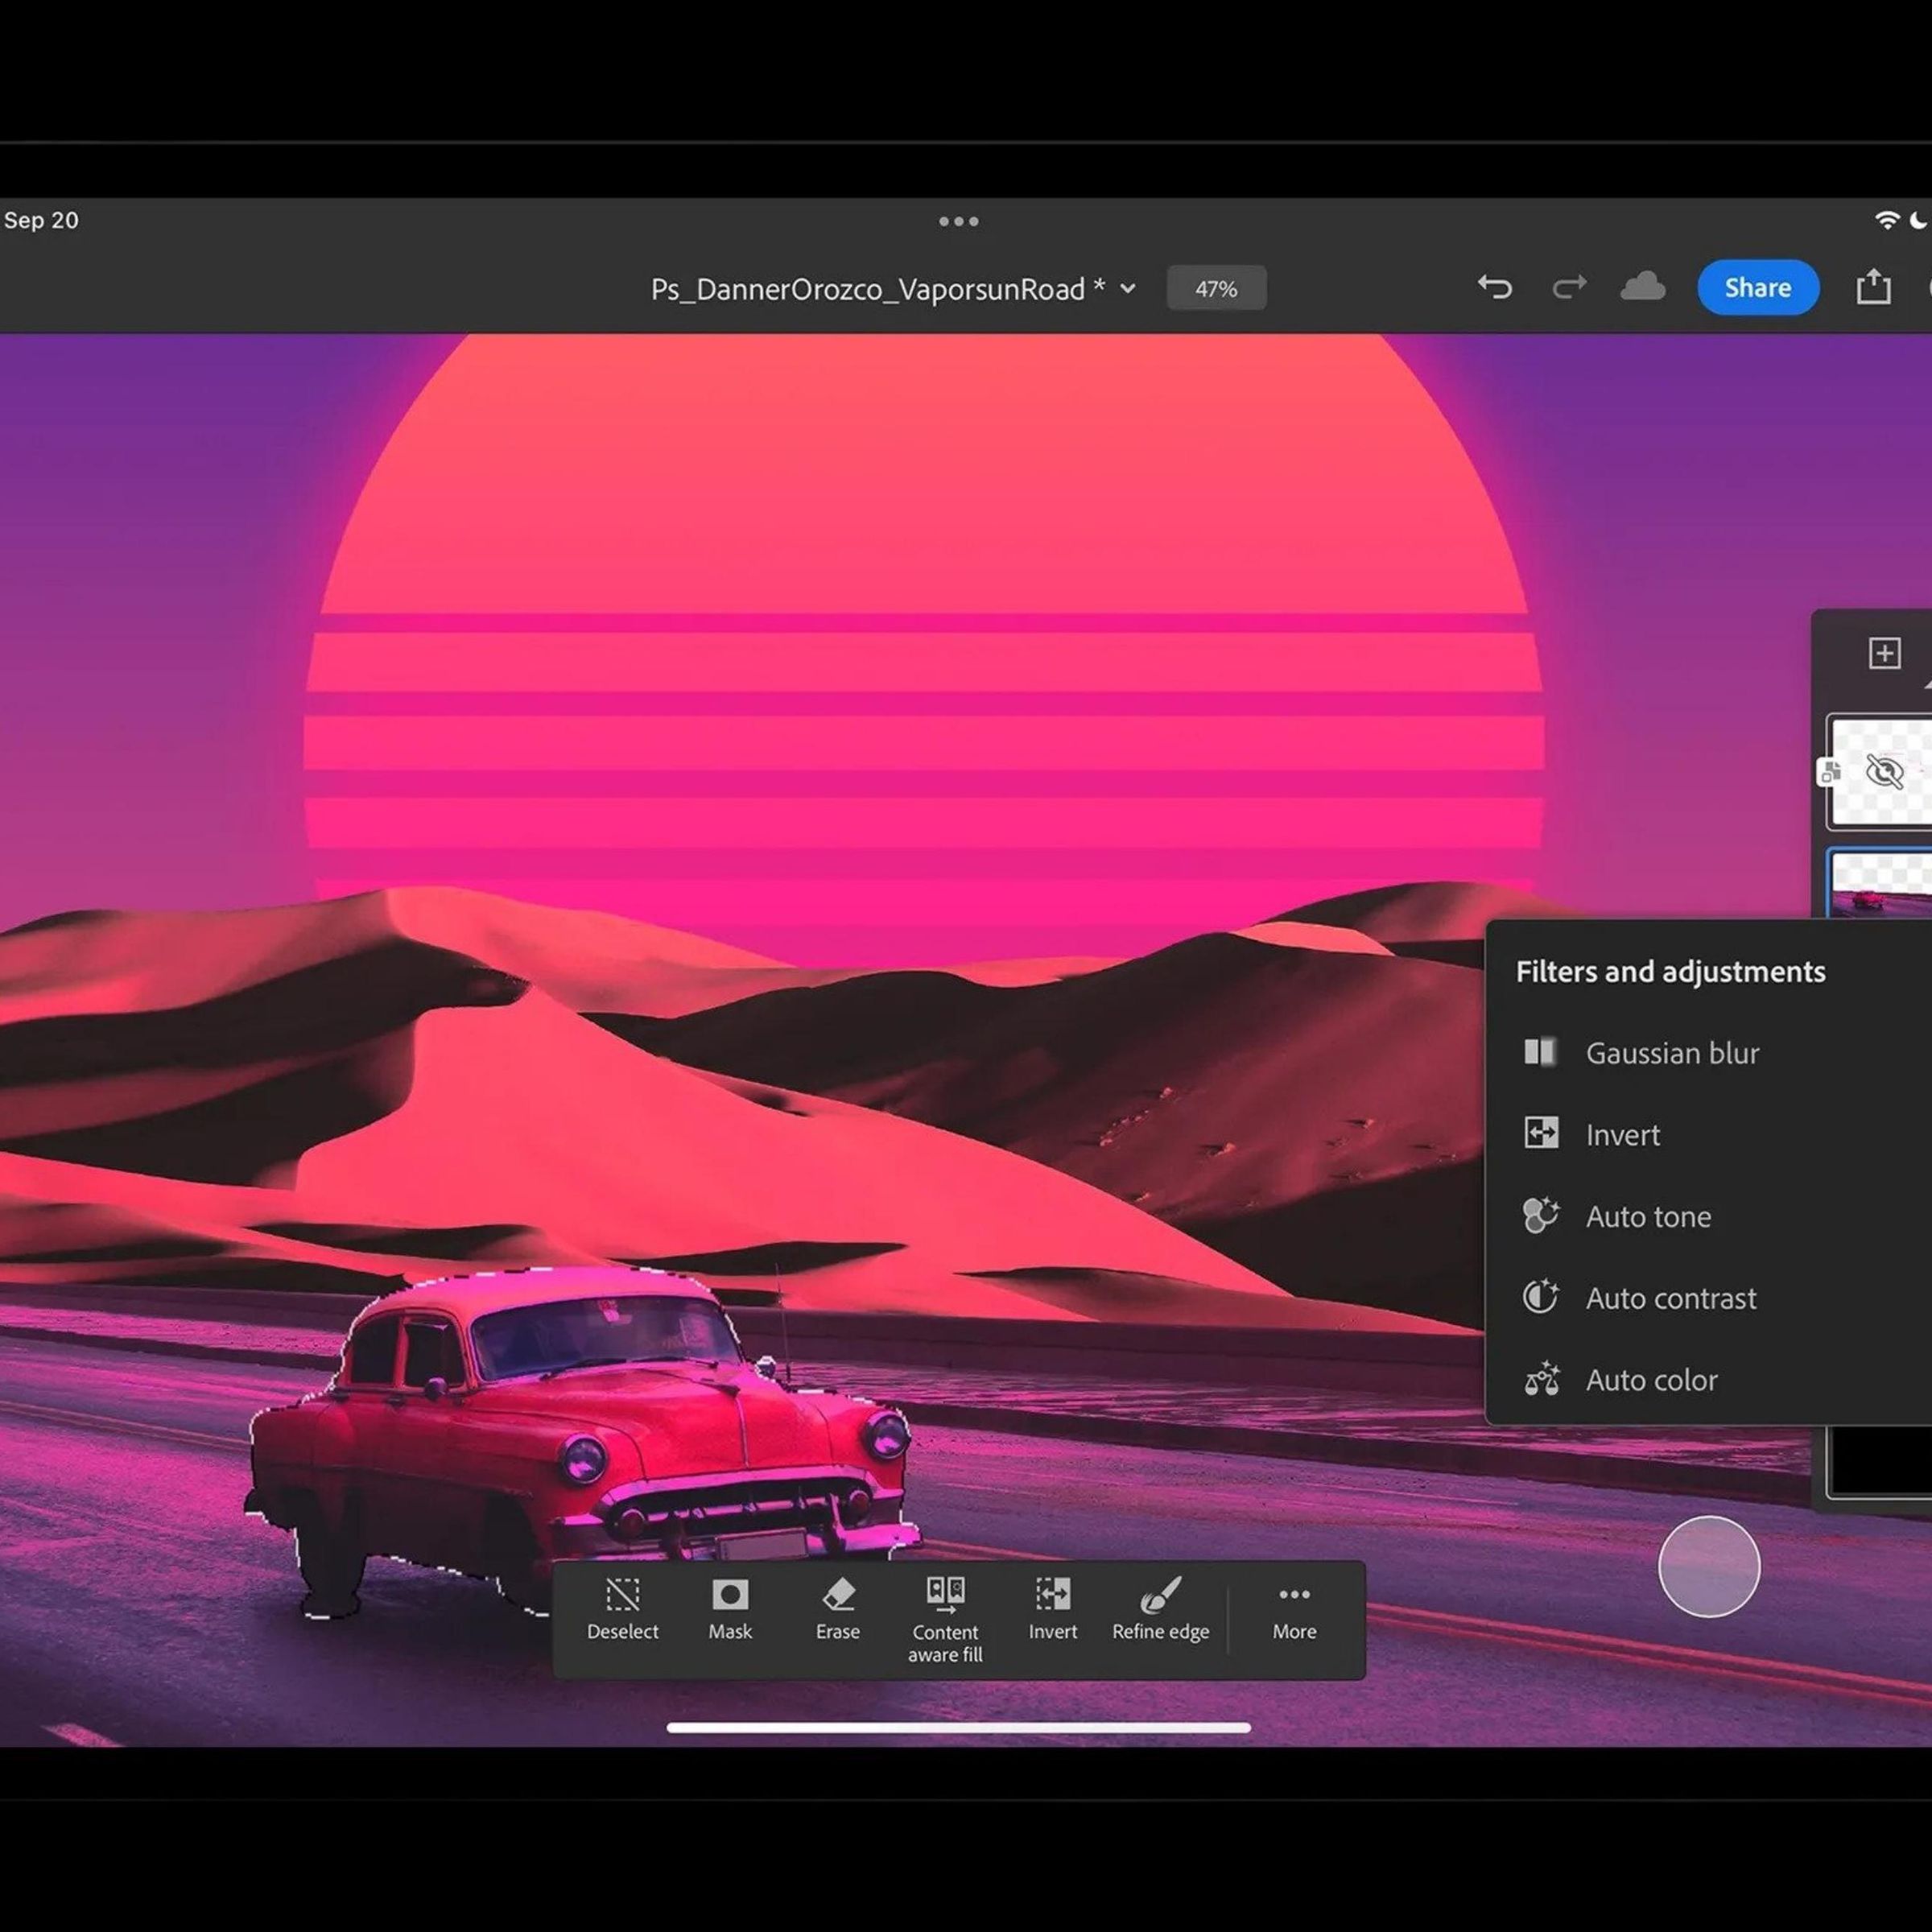 A vintage car against a pink and black synthwave style background, being edited on the iPad version of Photoshop.